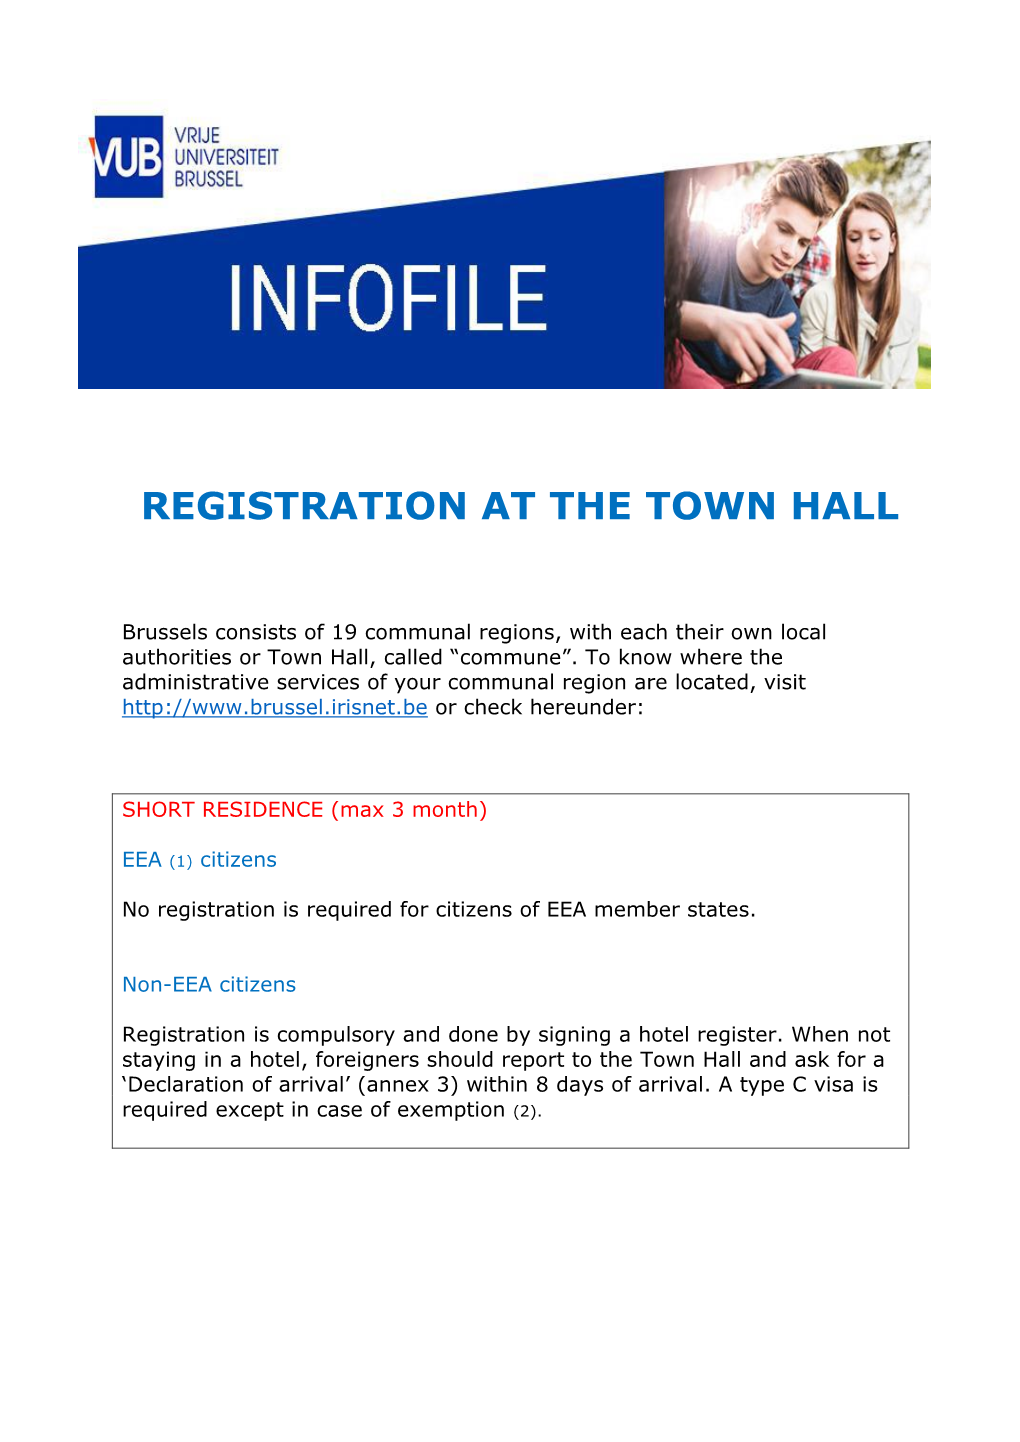 Registration at the Town Hall